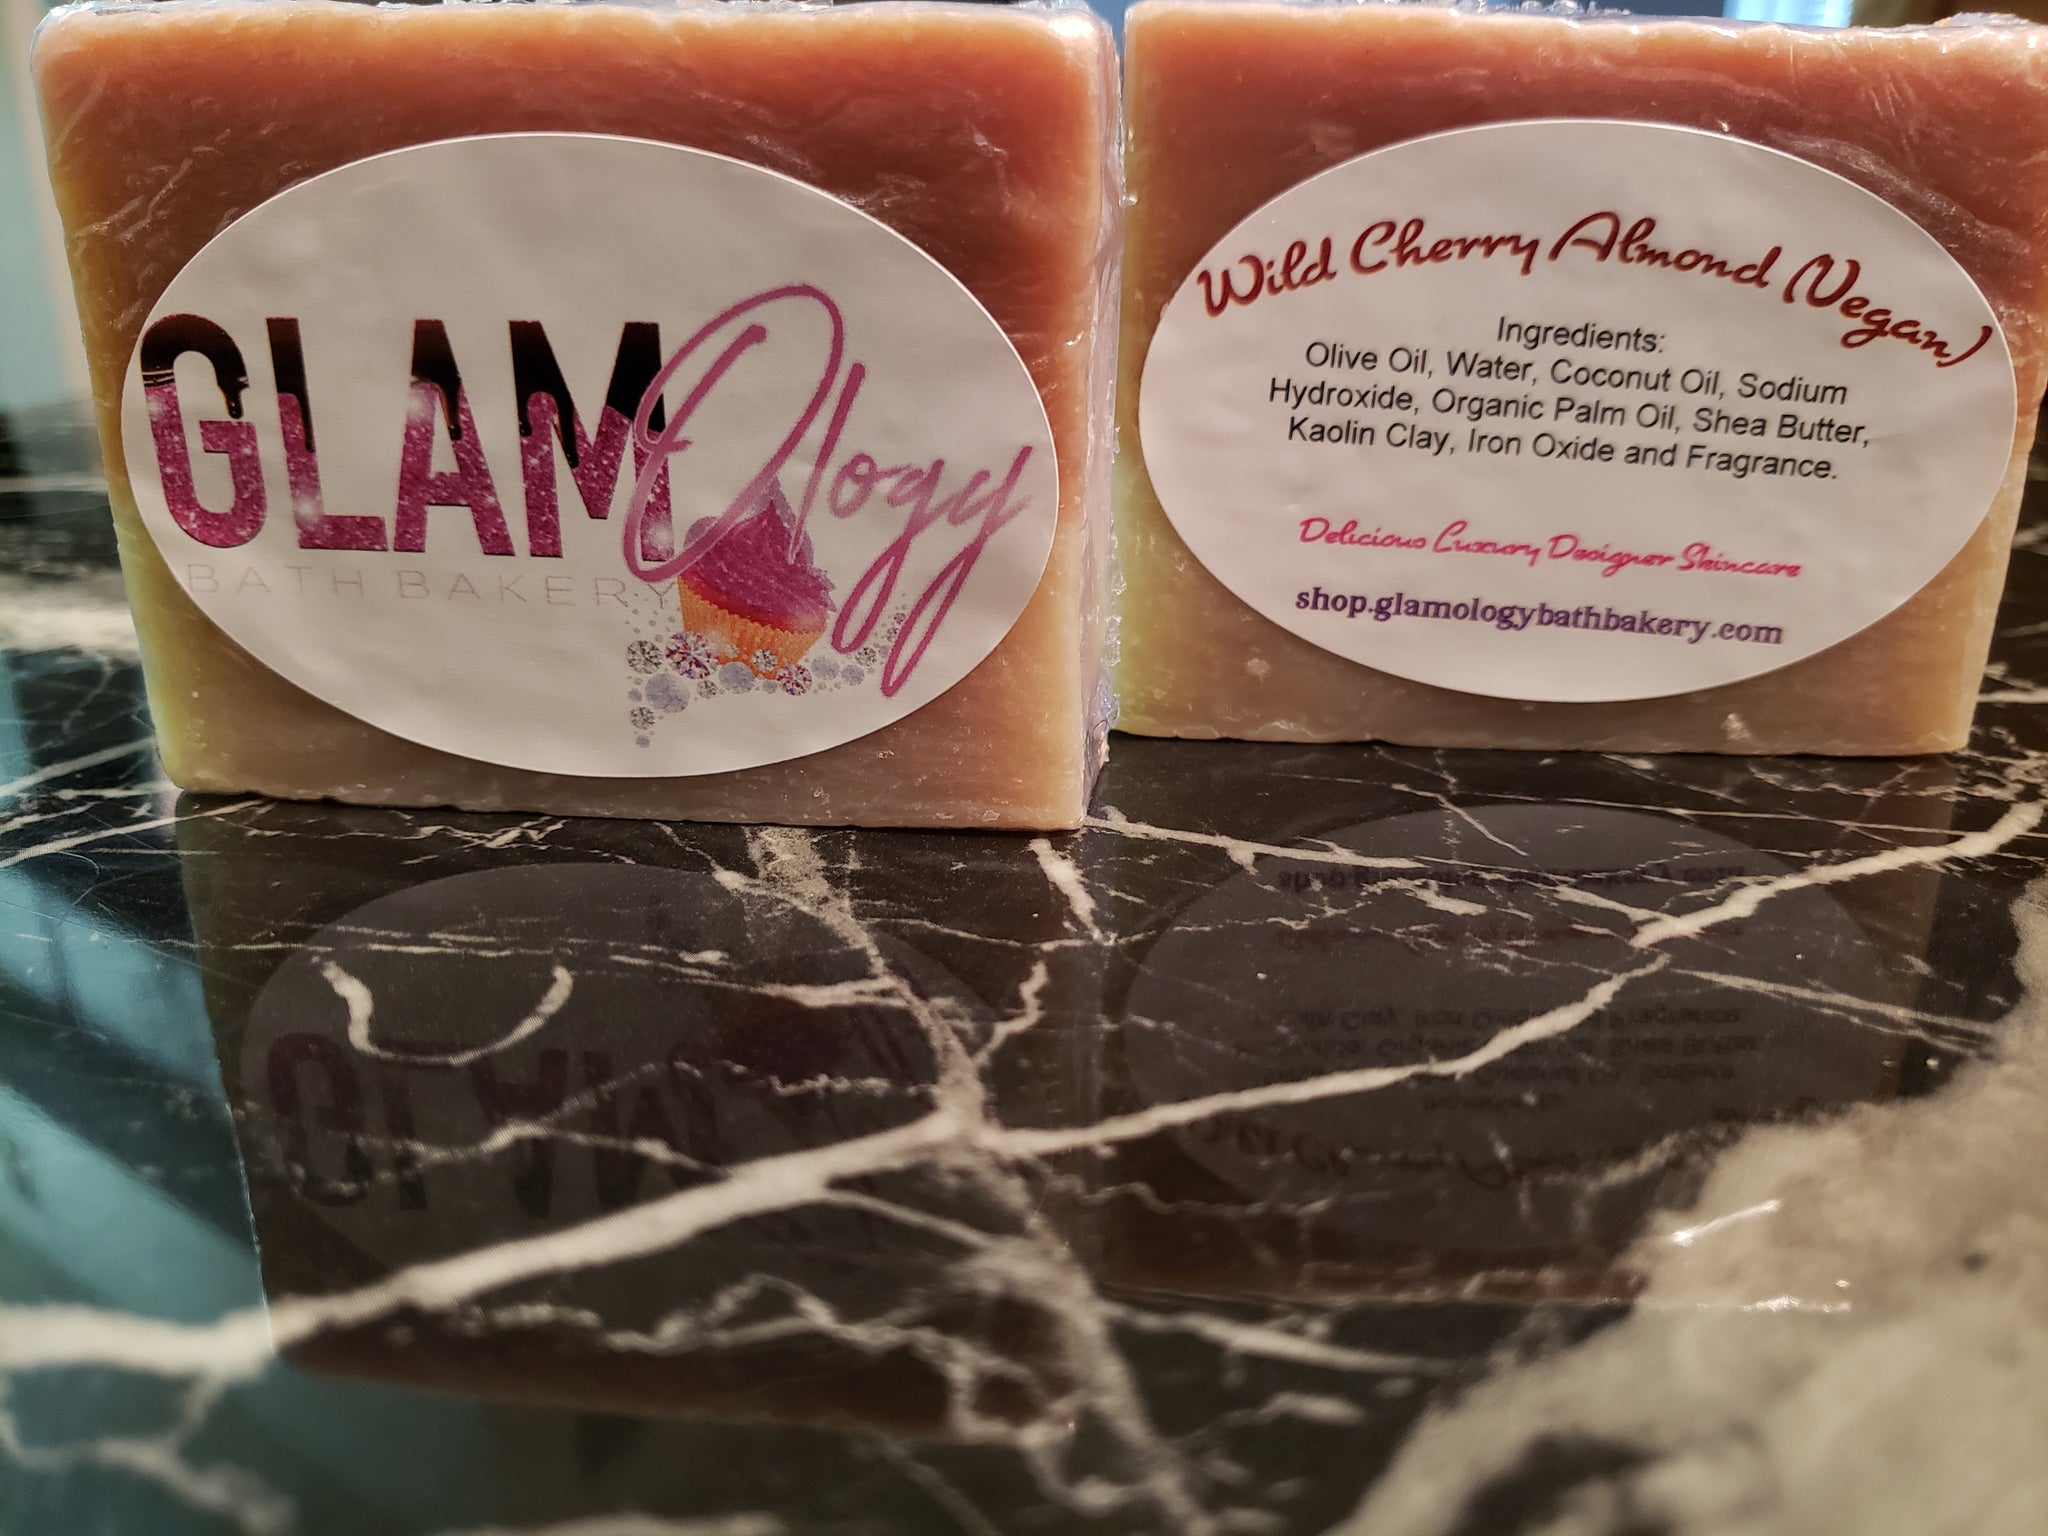 Wild Cherry and Almond Soap